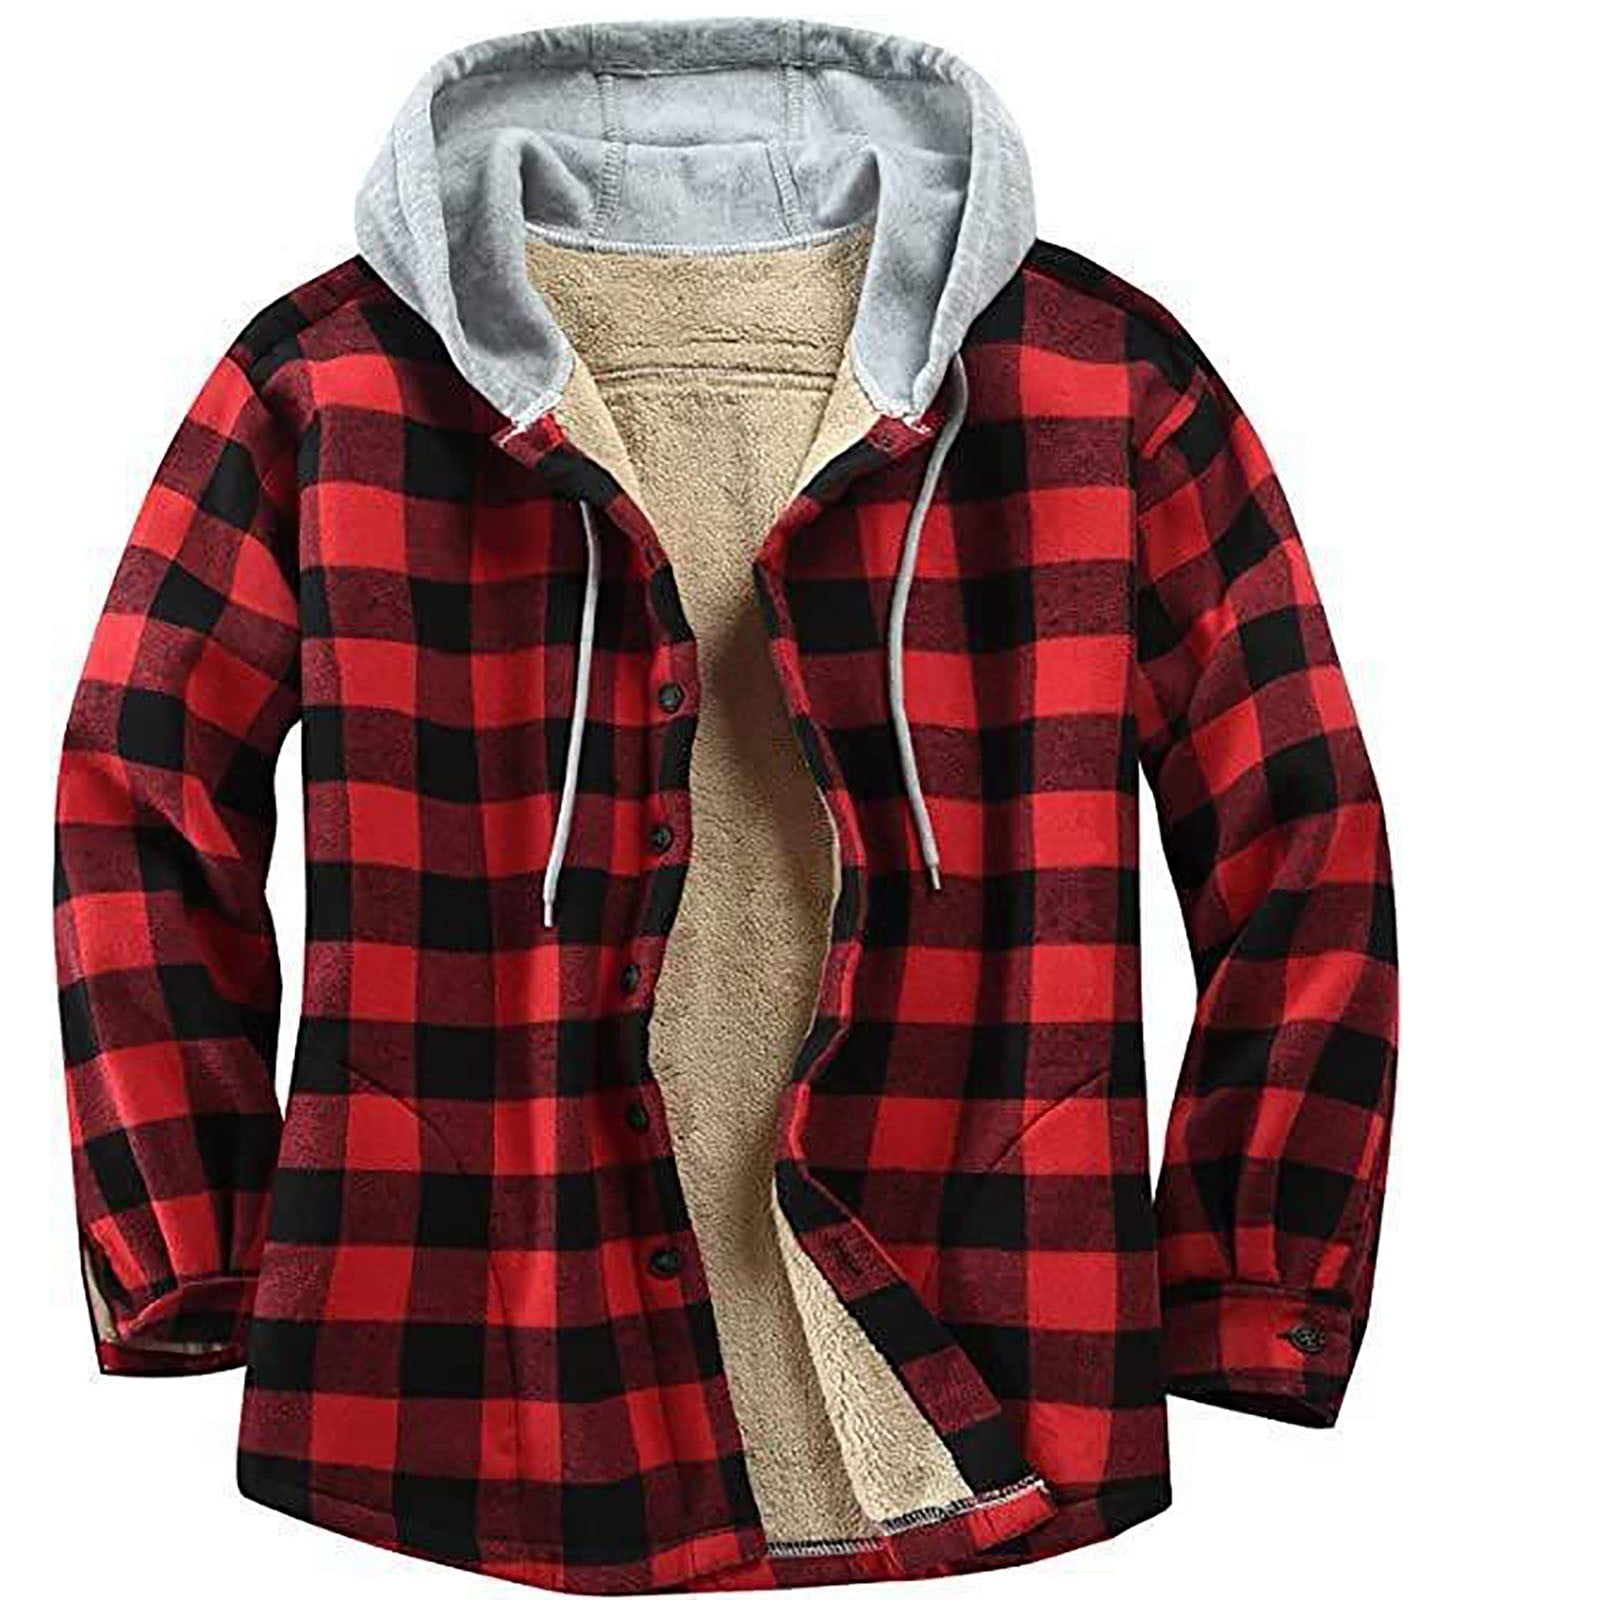 ZCFZJW Men's Quilted Lined Flannel Hooded Shirt Jacket, Soft Long Sleeve  Button Down Outdoor Plaid Sherpa Fleece Coat Jackets Red XL